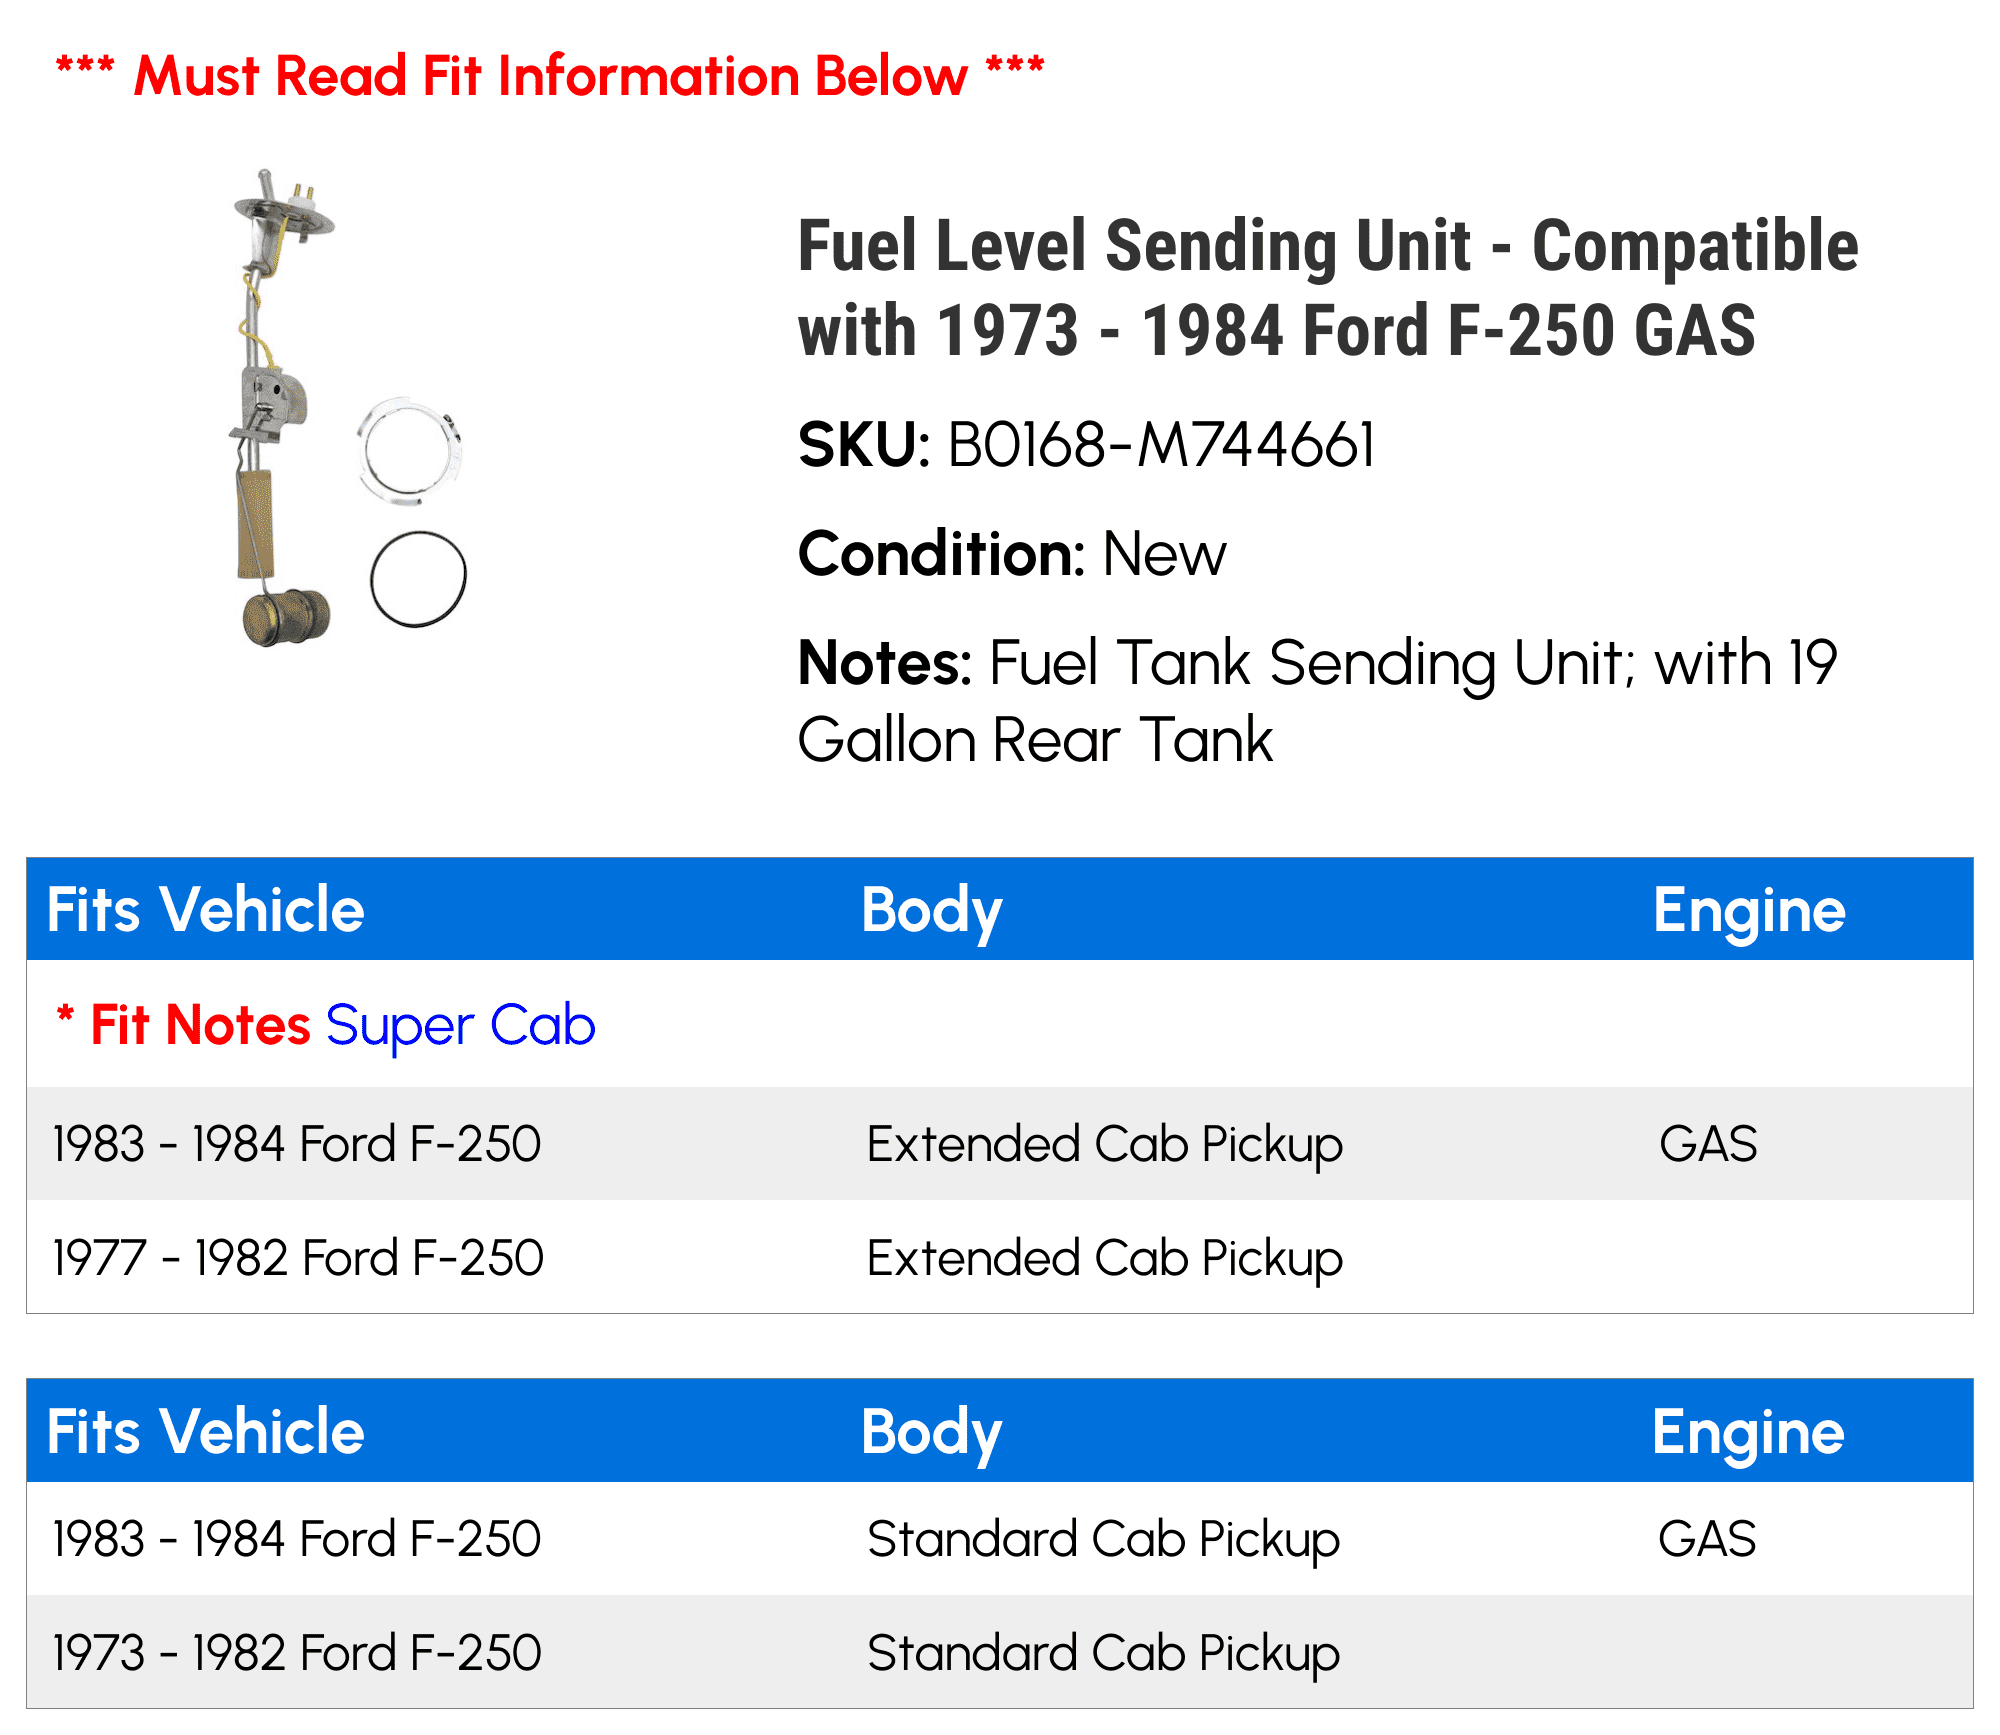 Fuel Level Sending Unit Compatible with 1973 1984 Ford F-250 GAS 1974  1975 1976 1977 1978 1979 1980 1981 1982 1983